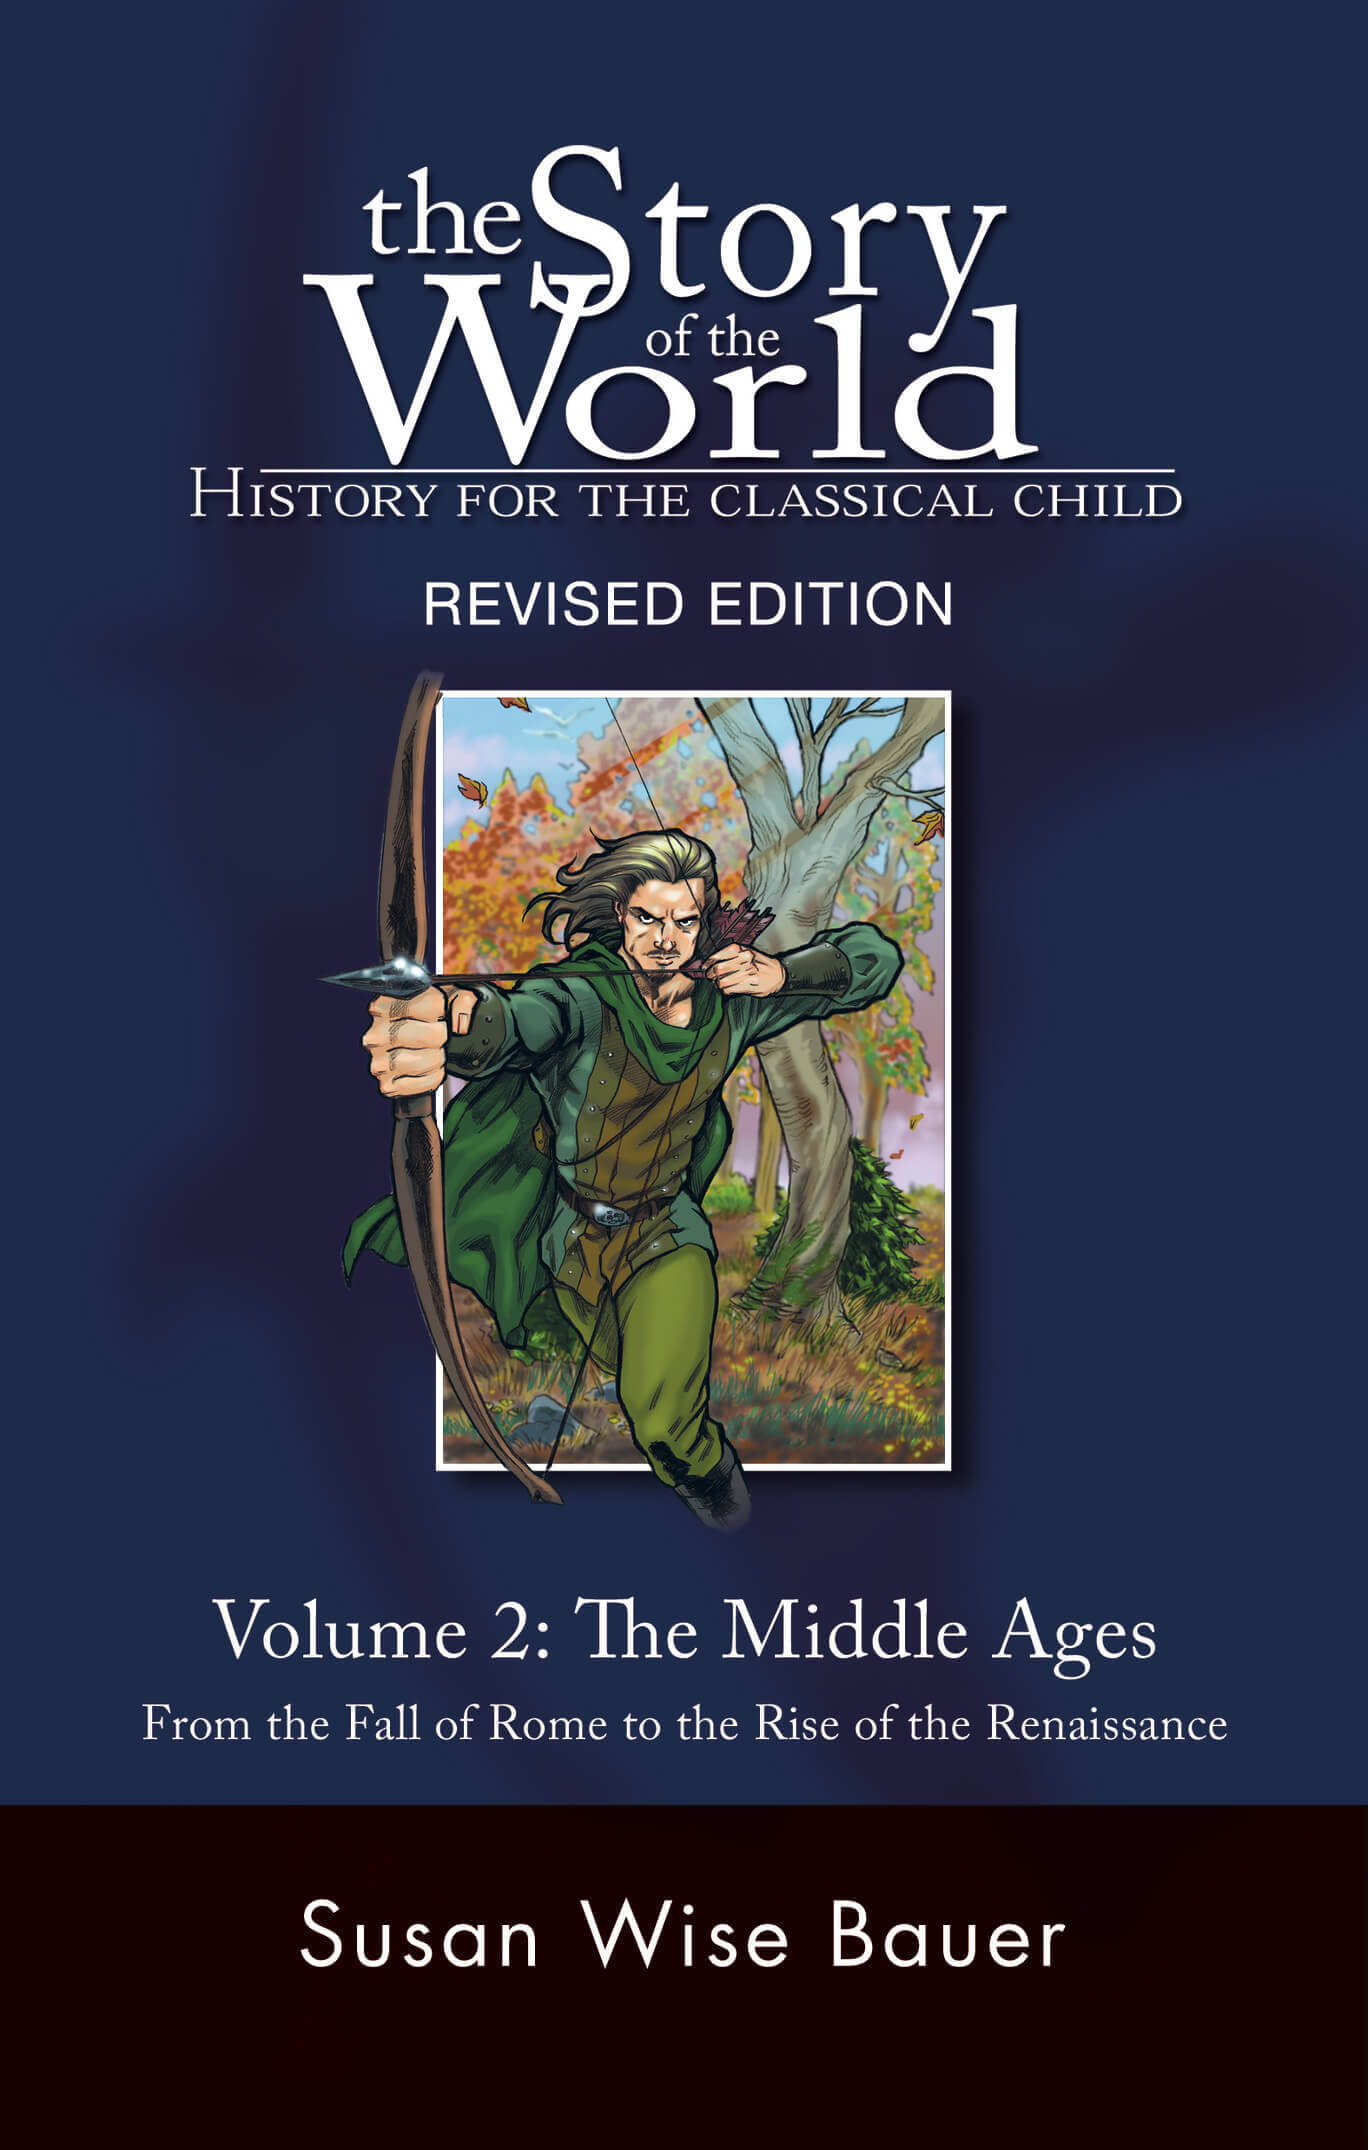 The Story of the World Vol. 2: The Middle Ages, Revised Edition Text